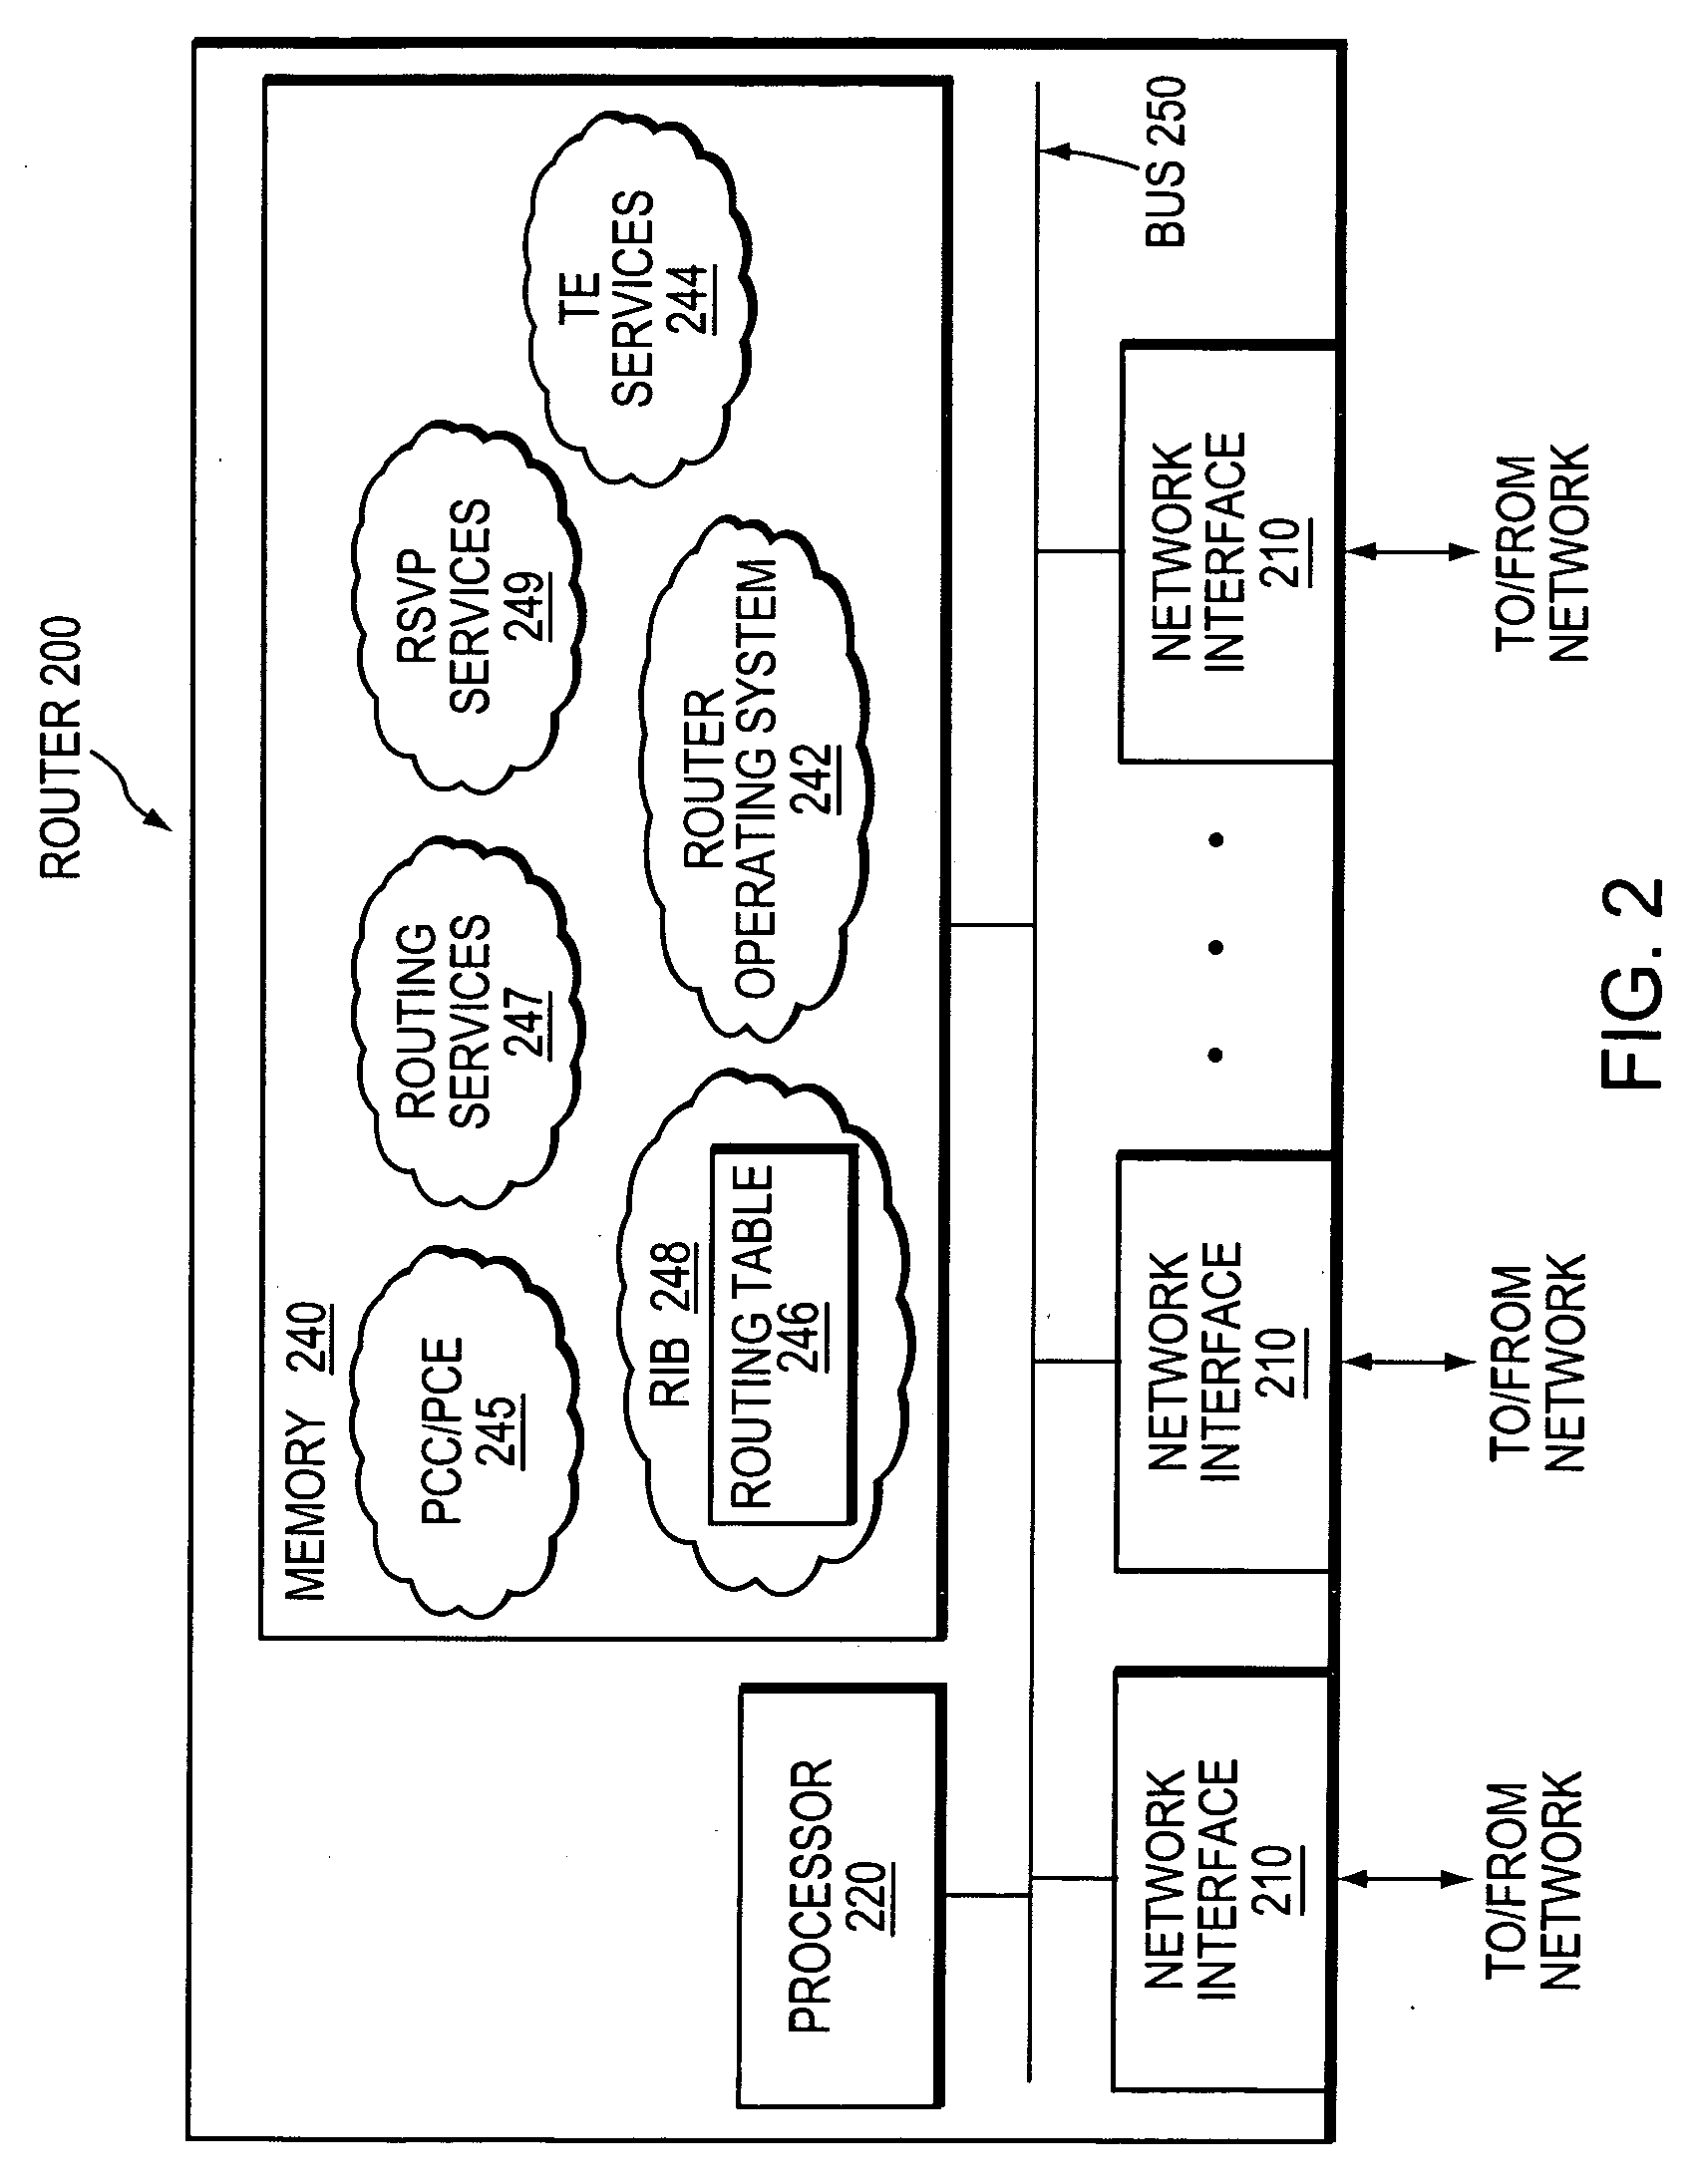 Inter-domain optimization trigger in PCE-based environment